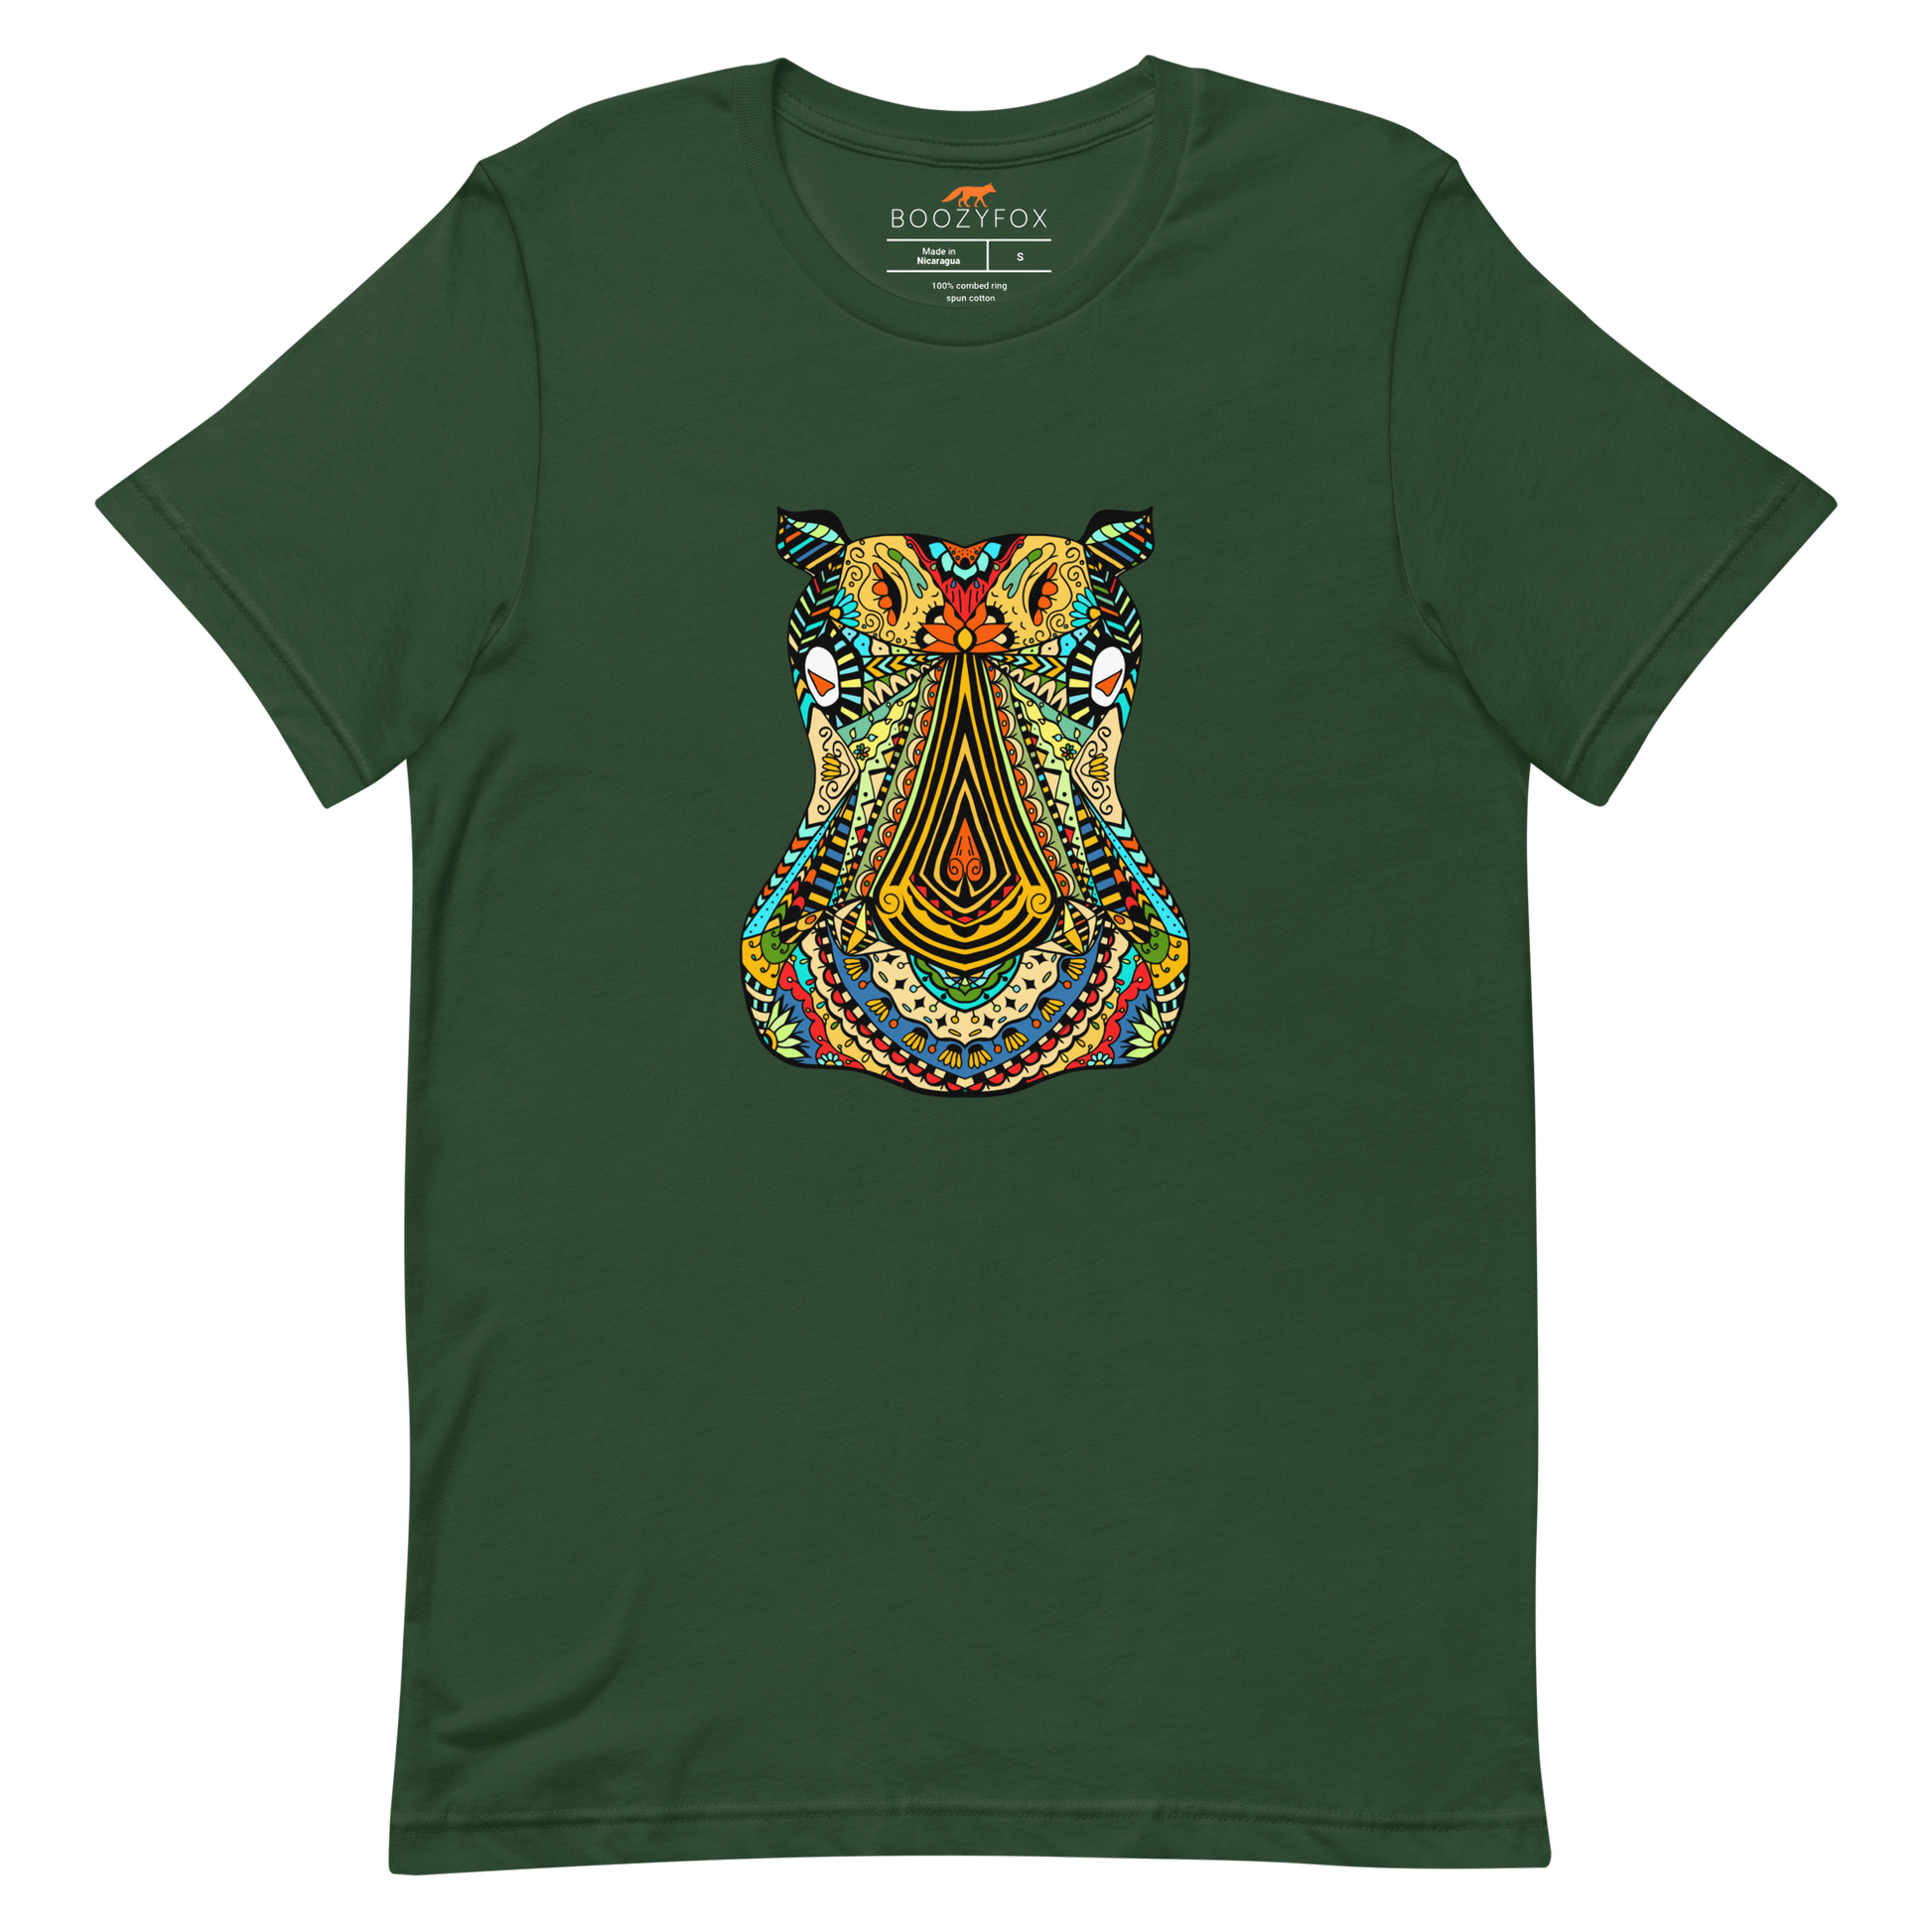 Forest Green Premium Hippo T-Shirt featuring a mesmerizing Zentangle Hippo graphic on the chest - Cool Graphic Hippo Tees - Boozy Fox